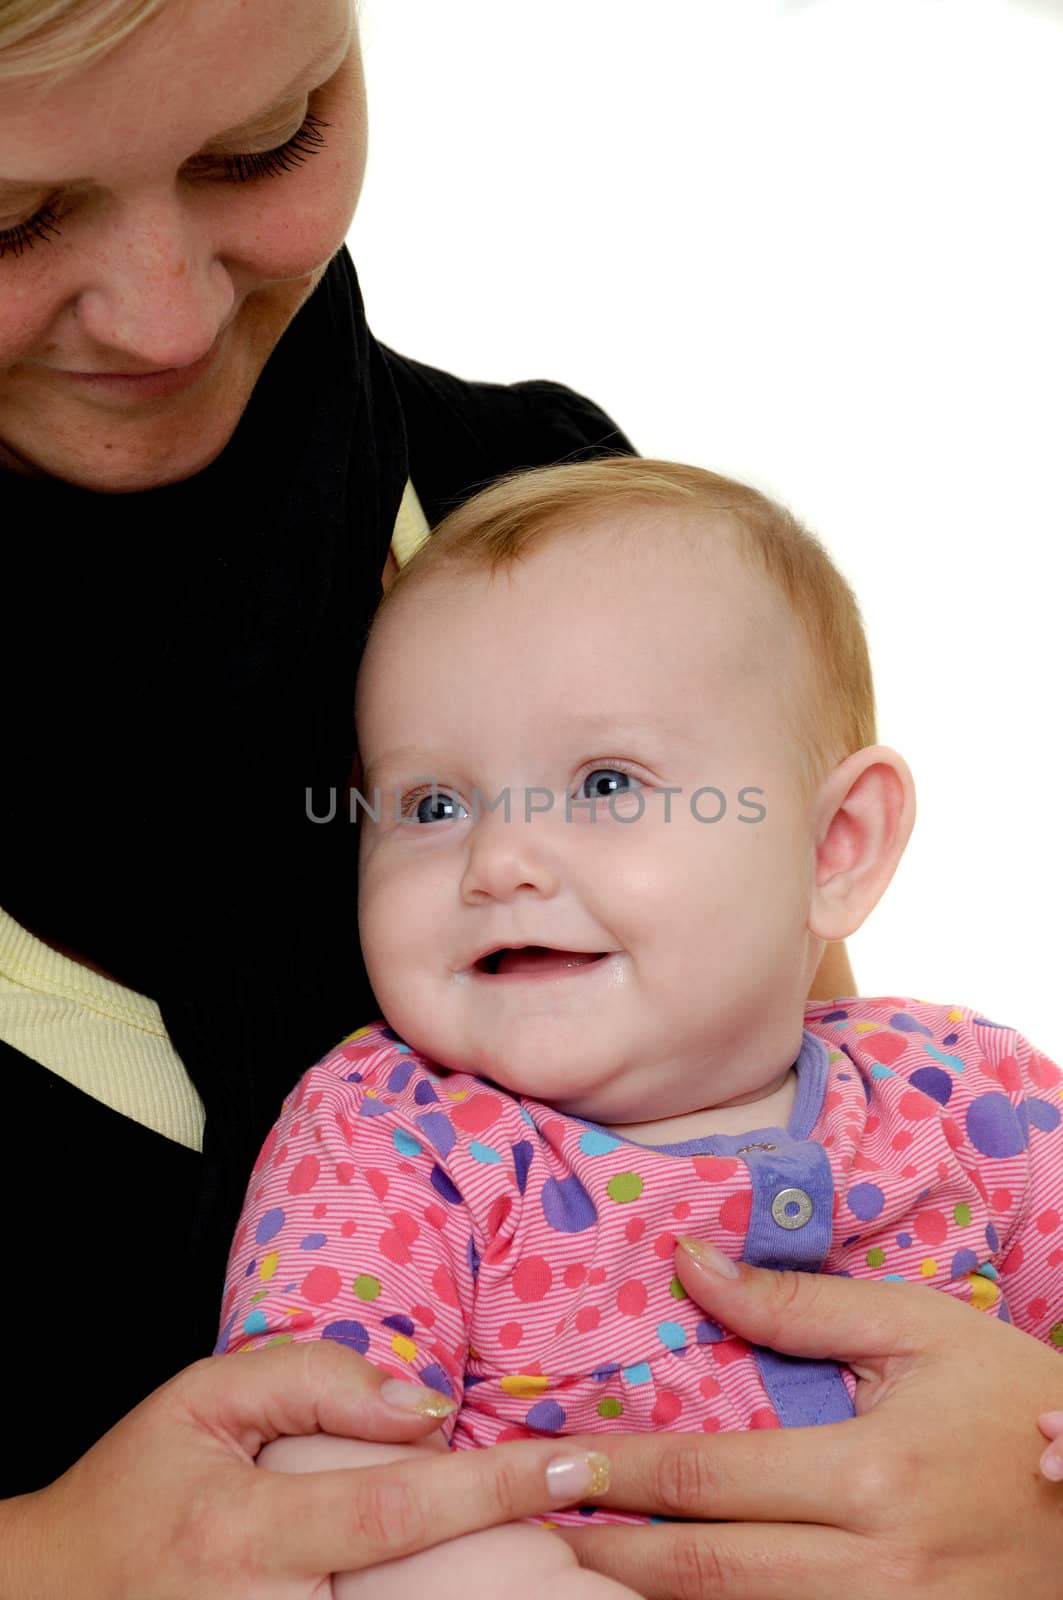 Mother is looking down on her sweet smiling baby. Taken on a white background.